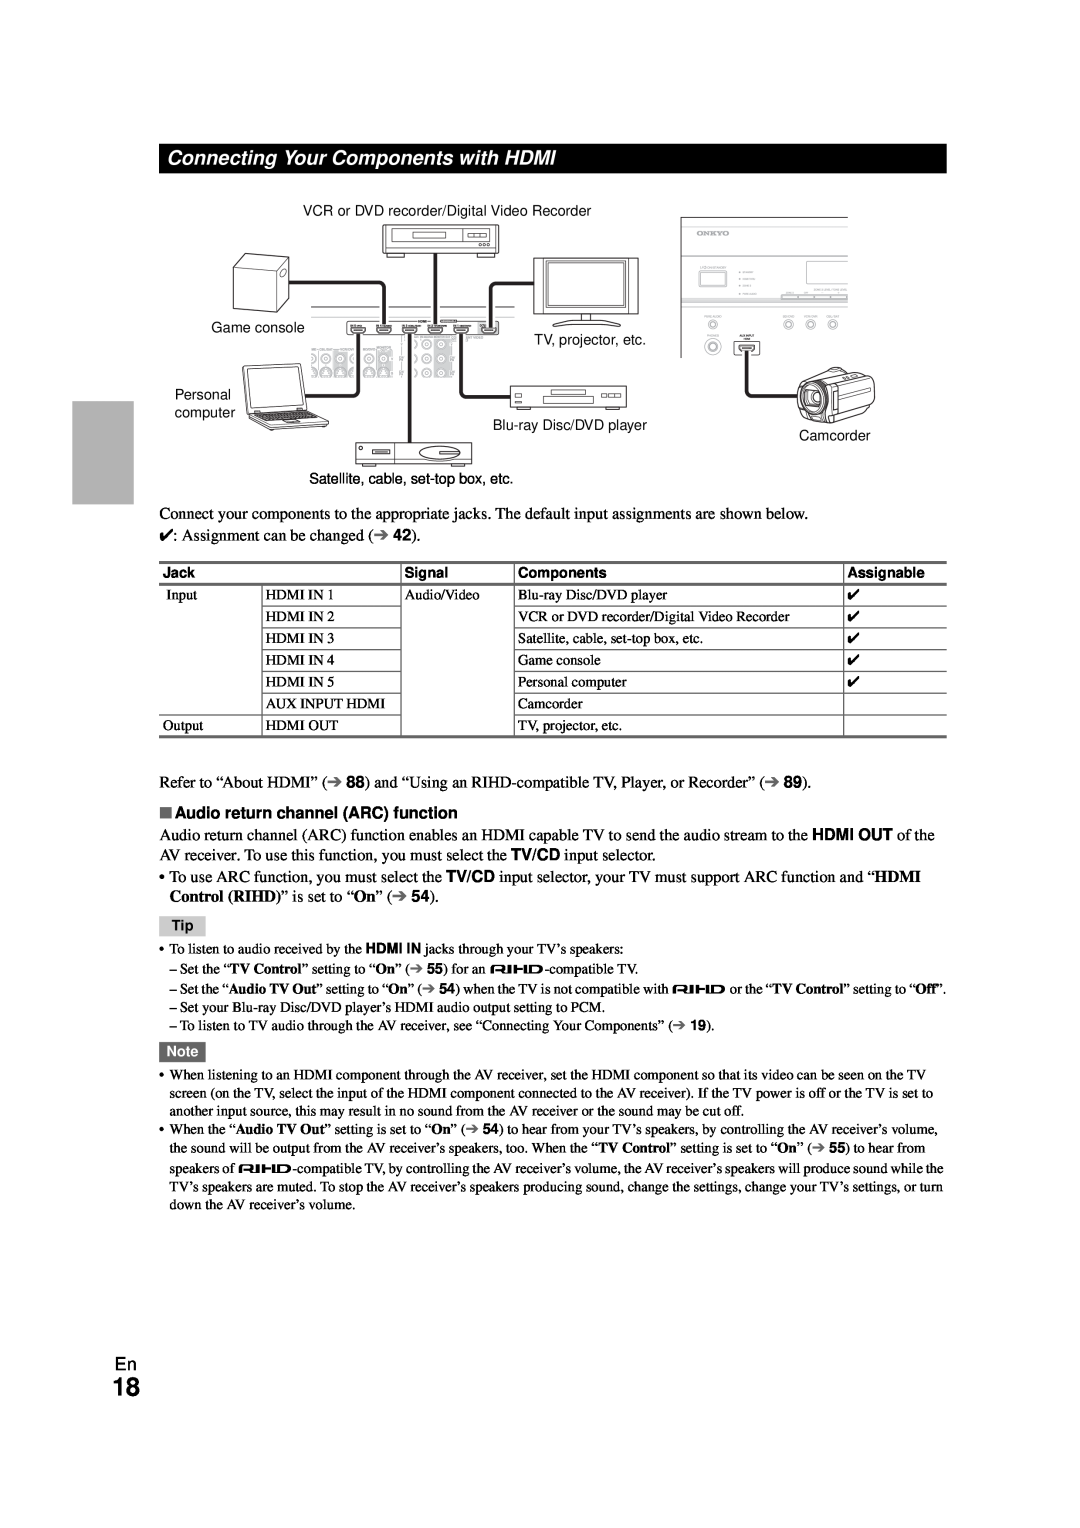 Onkyo HT-RC270 instruction manual Connecting Your Components with HDMI, Audio return channel ARC function 